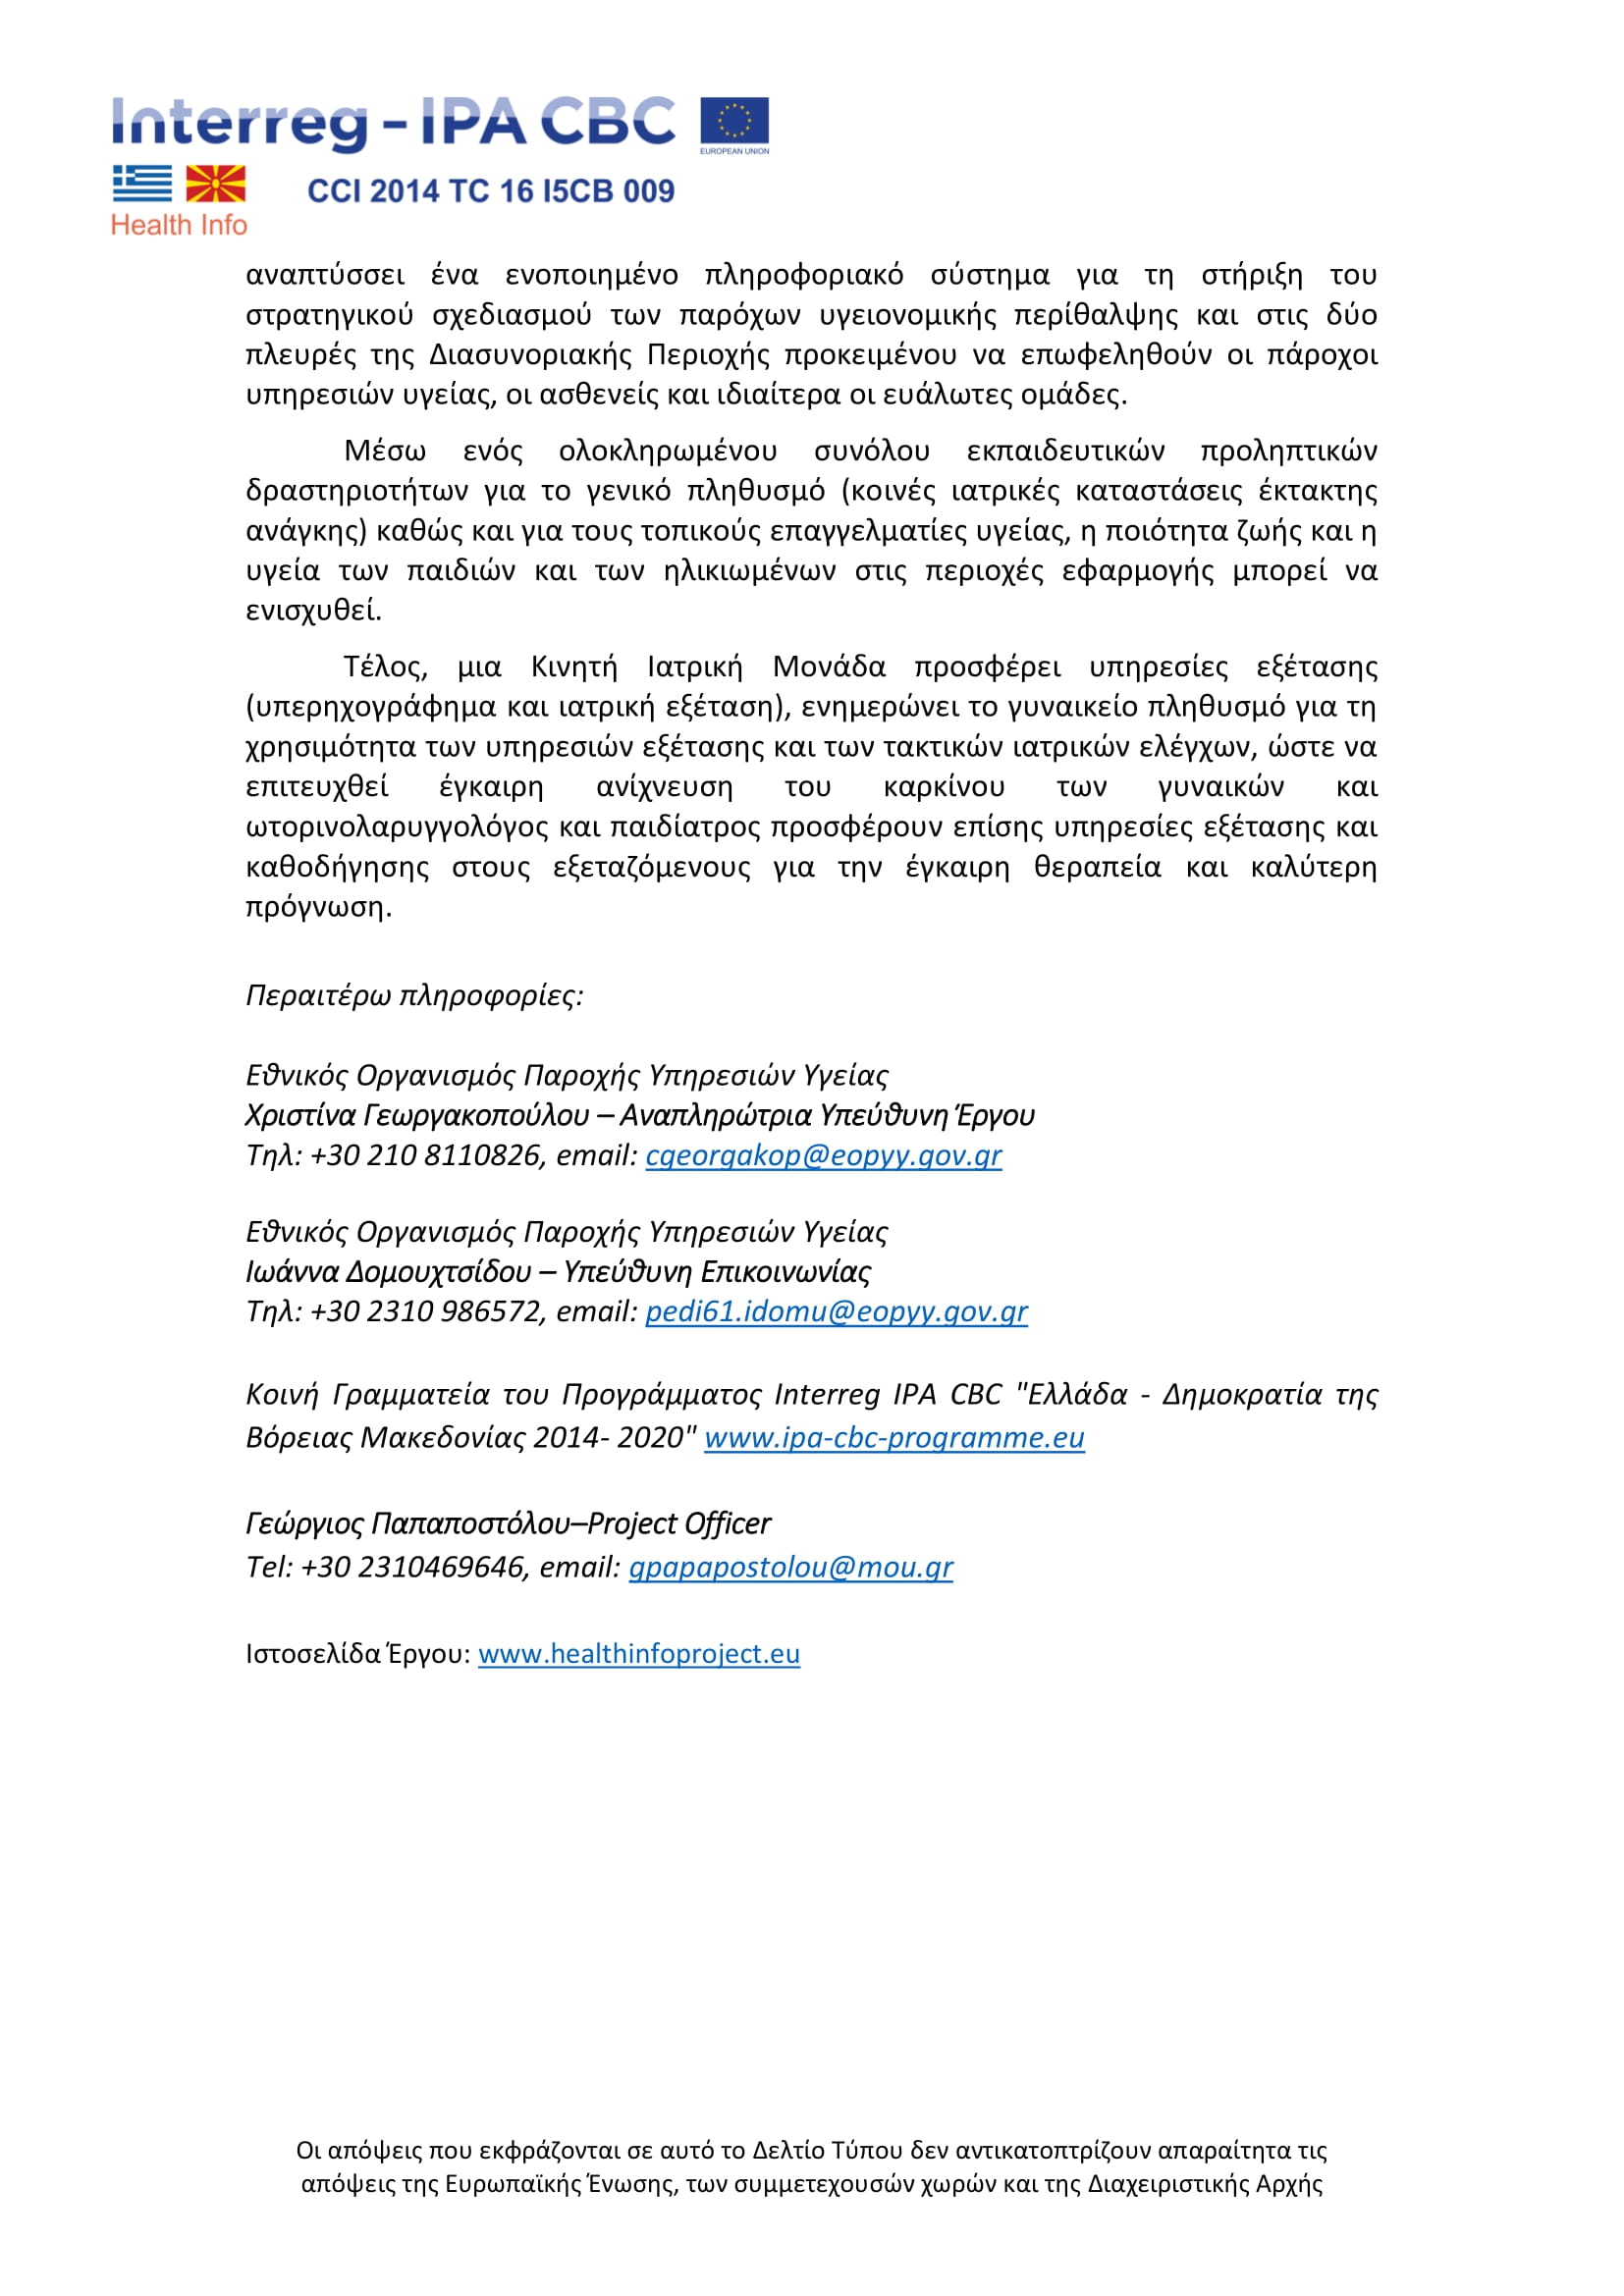 PRESS RELEASE HEALTH INFO _ THERMAIKOS_ΚΙΝΗΤΗ ΜΟΝΑΔΑ_14.04_final 2